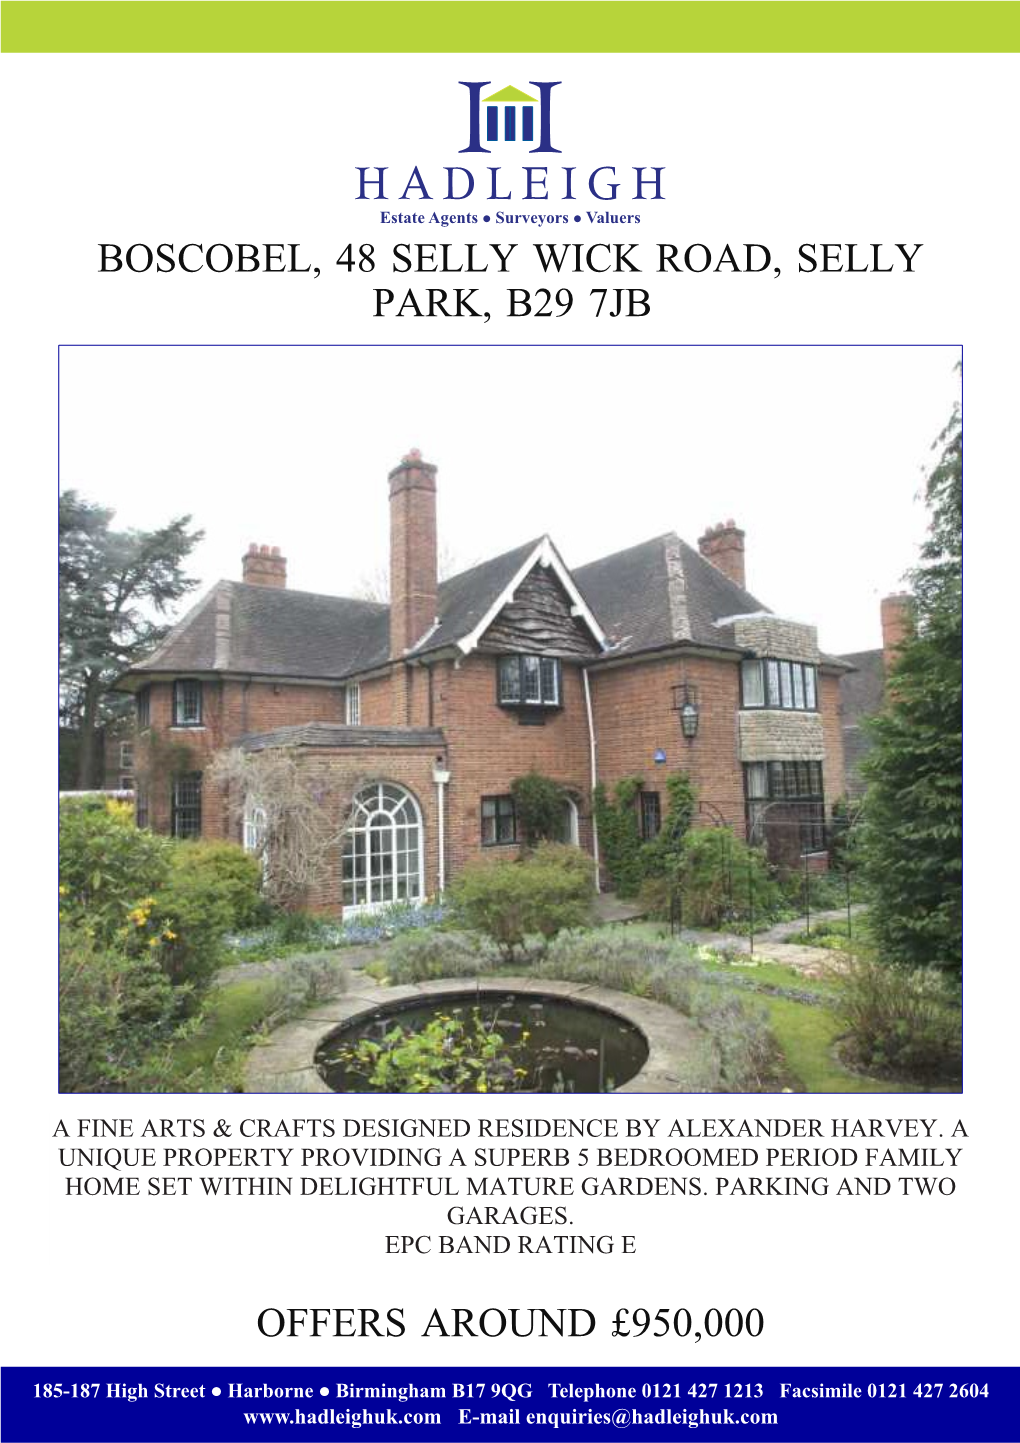 Boscobel, 48 Selly Wick Road, Selly Park, B29 7Jb Offers Around £950000